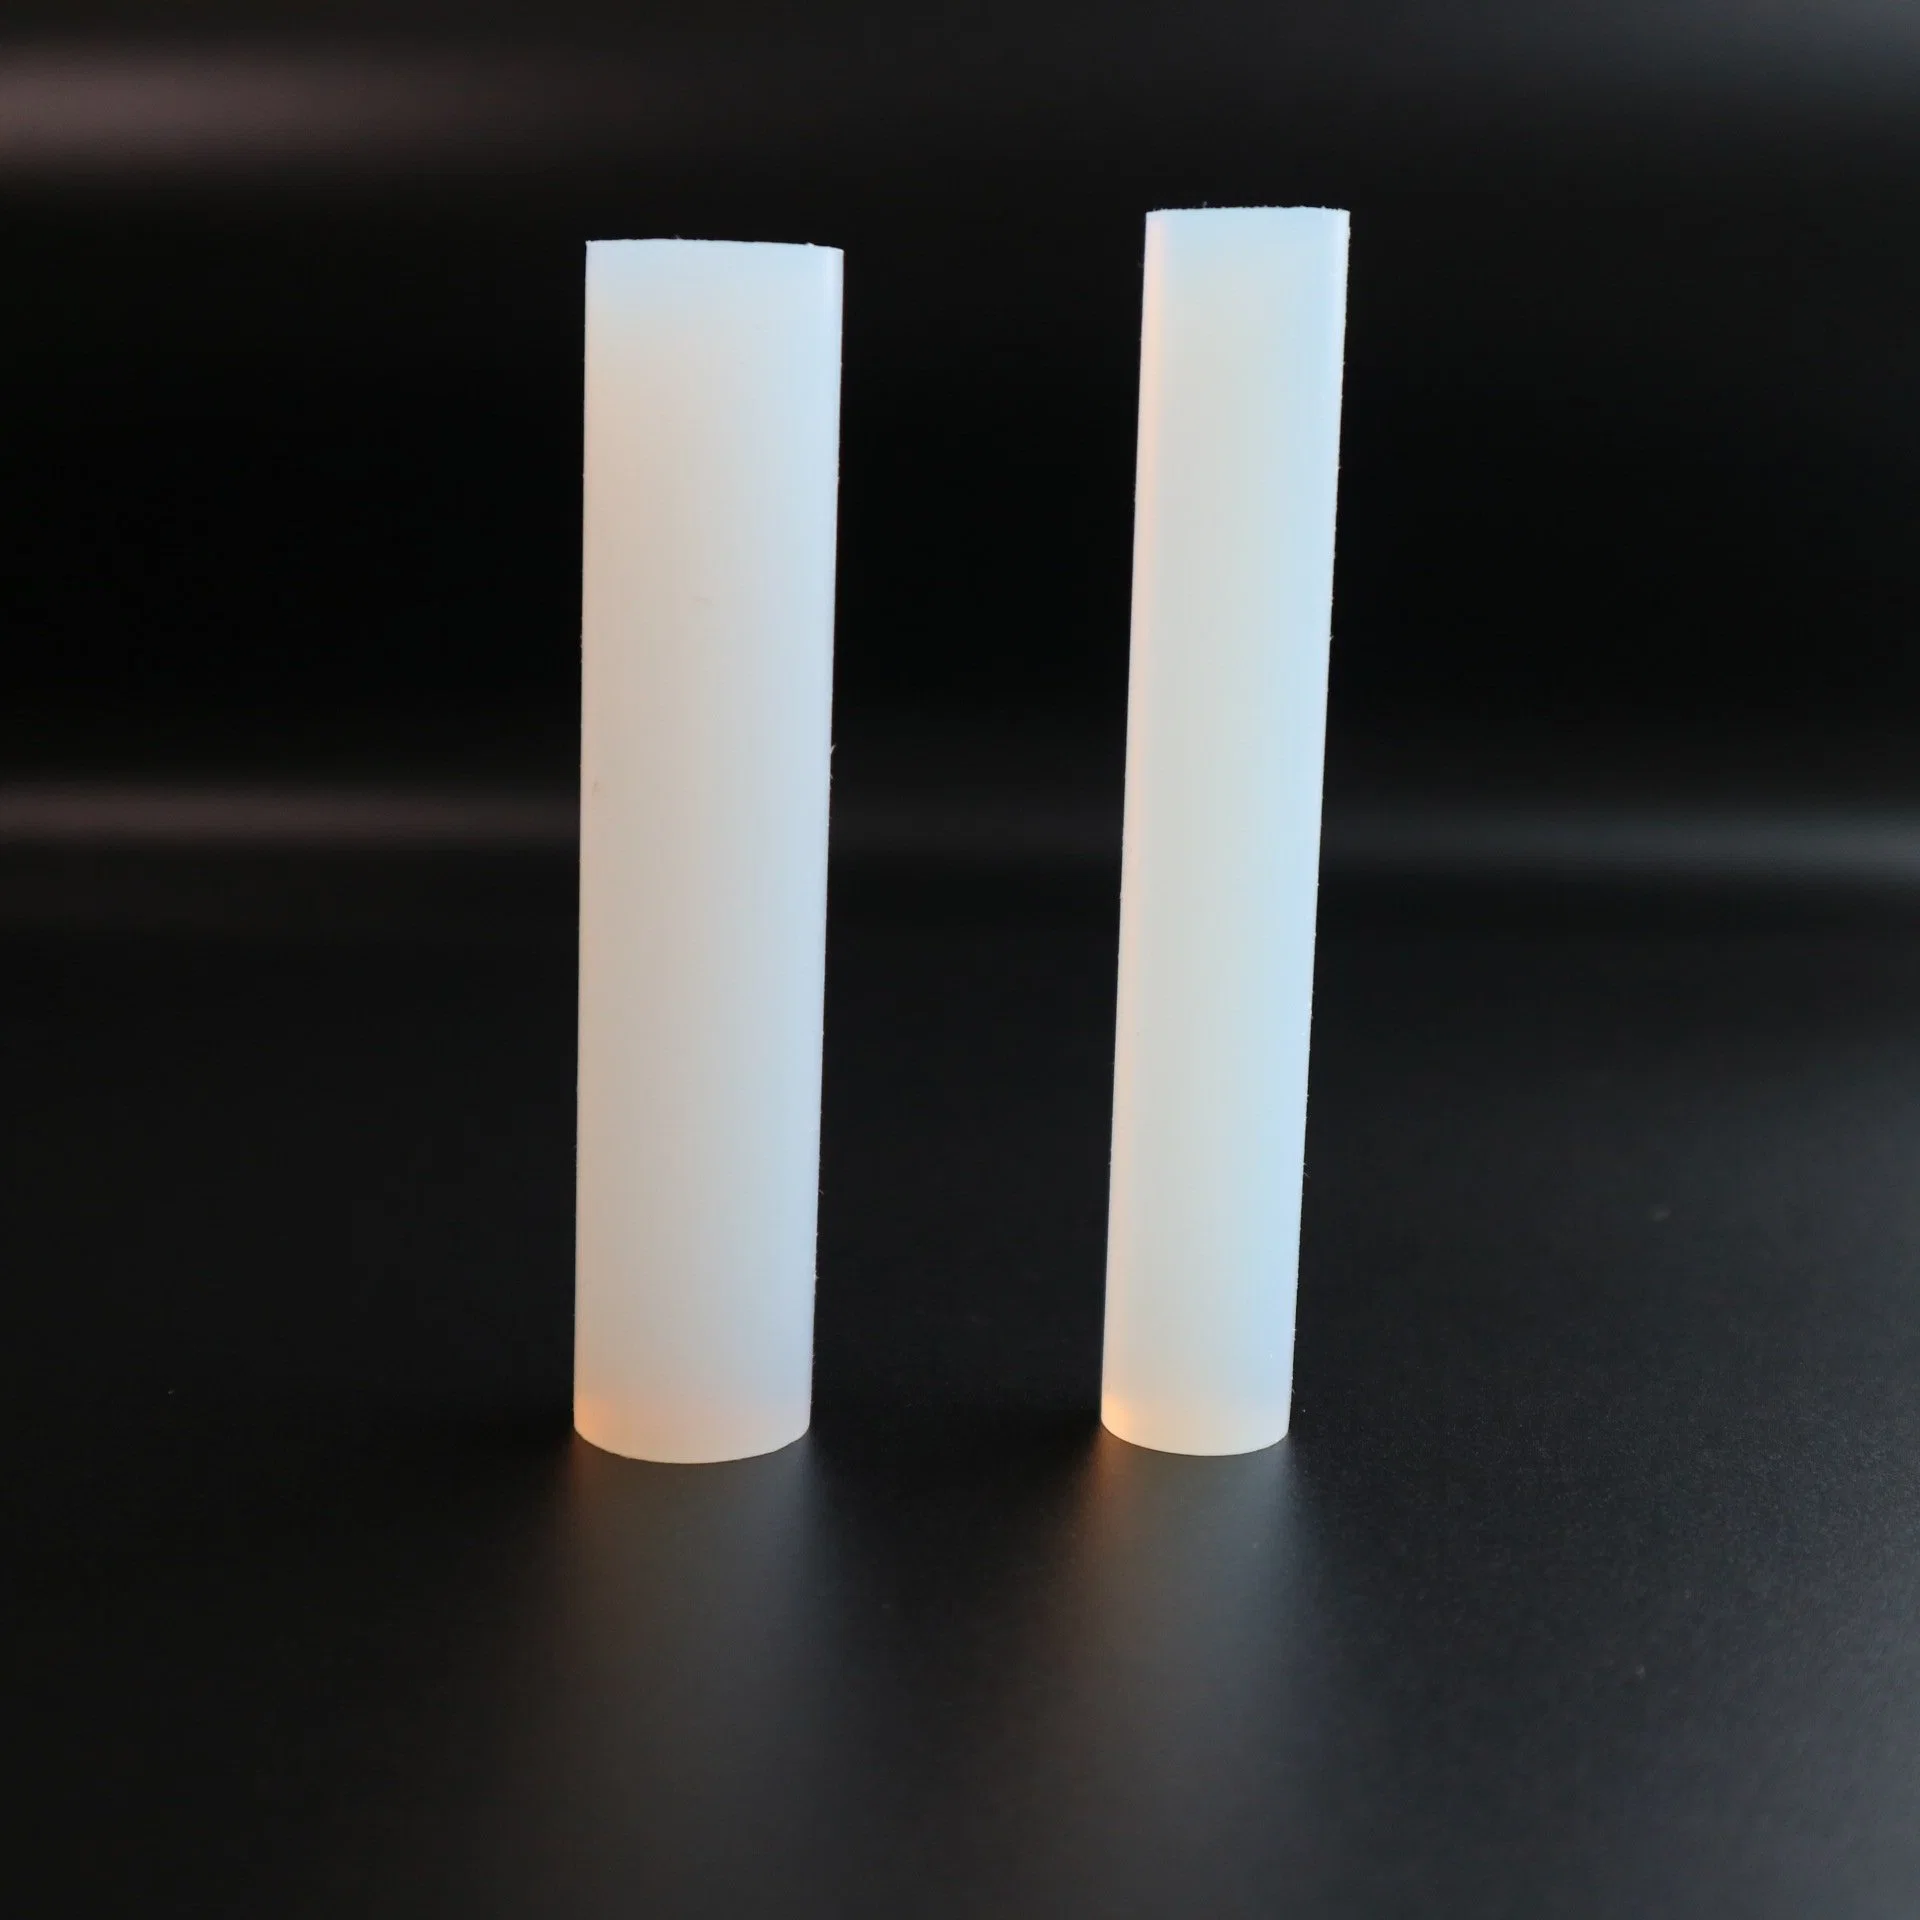 Chinese Semiconductor Exports PTFE Rods PFA